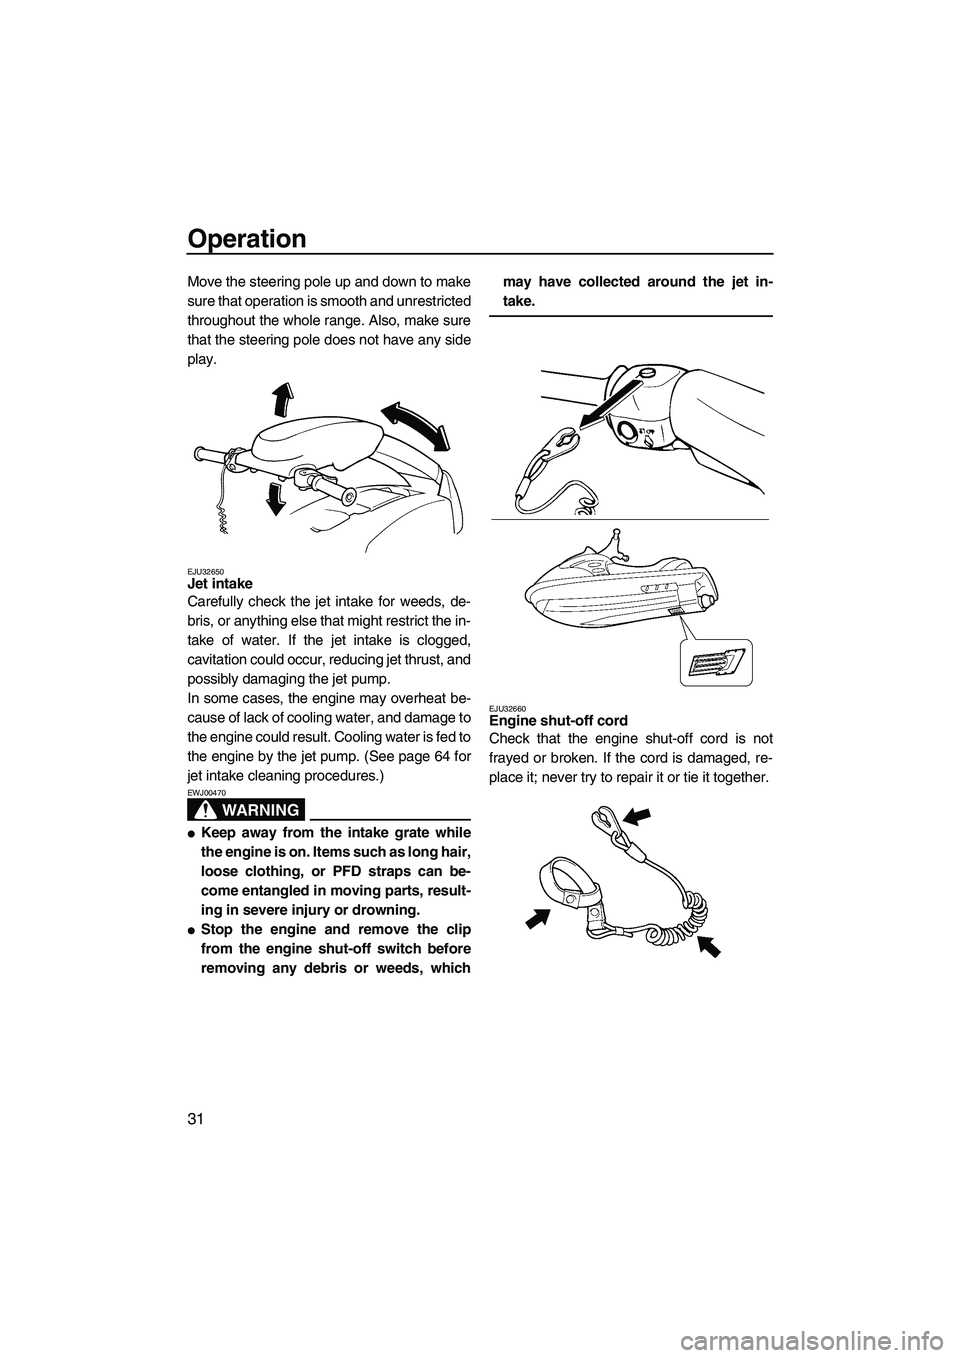 YAMAHA SUPERJET 2007  Owners Manual Operation
31
Move the steering pole up and down to make
sure that operation is smooth and unrestricted
throughout the whole range. Also, make sure
that the steering pole does not have any side
play.
E